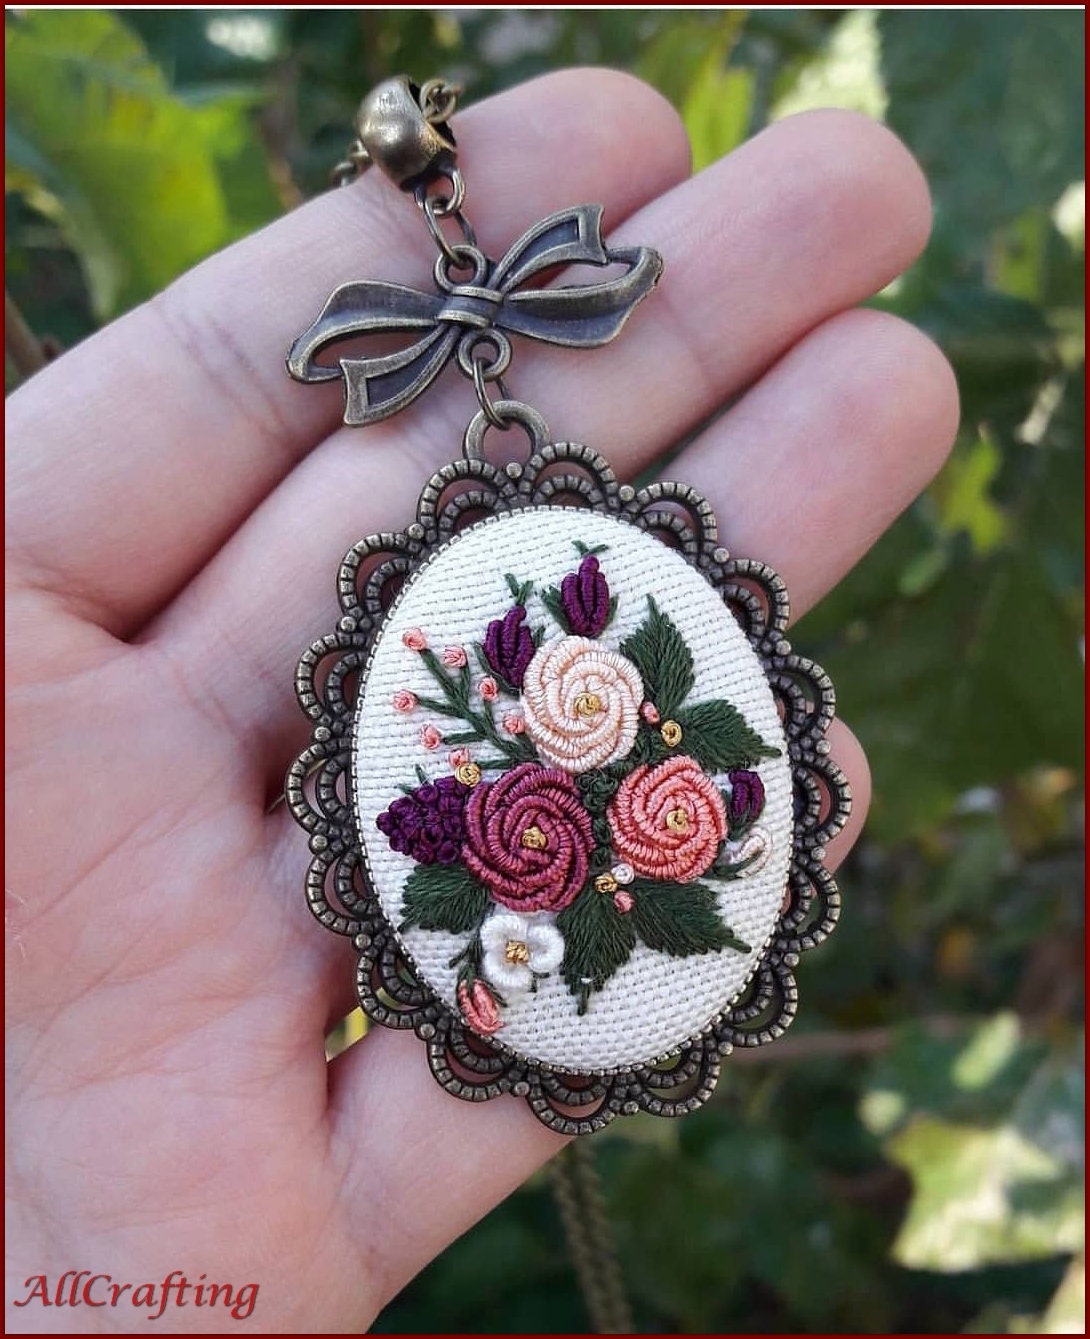 Ribbon embroidered pendant for her - Shop Embroidery Dreams Necklaces -  Pinkoi